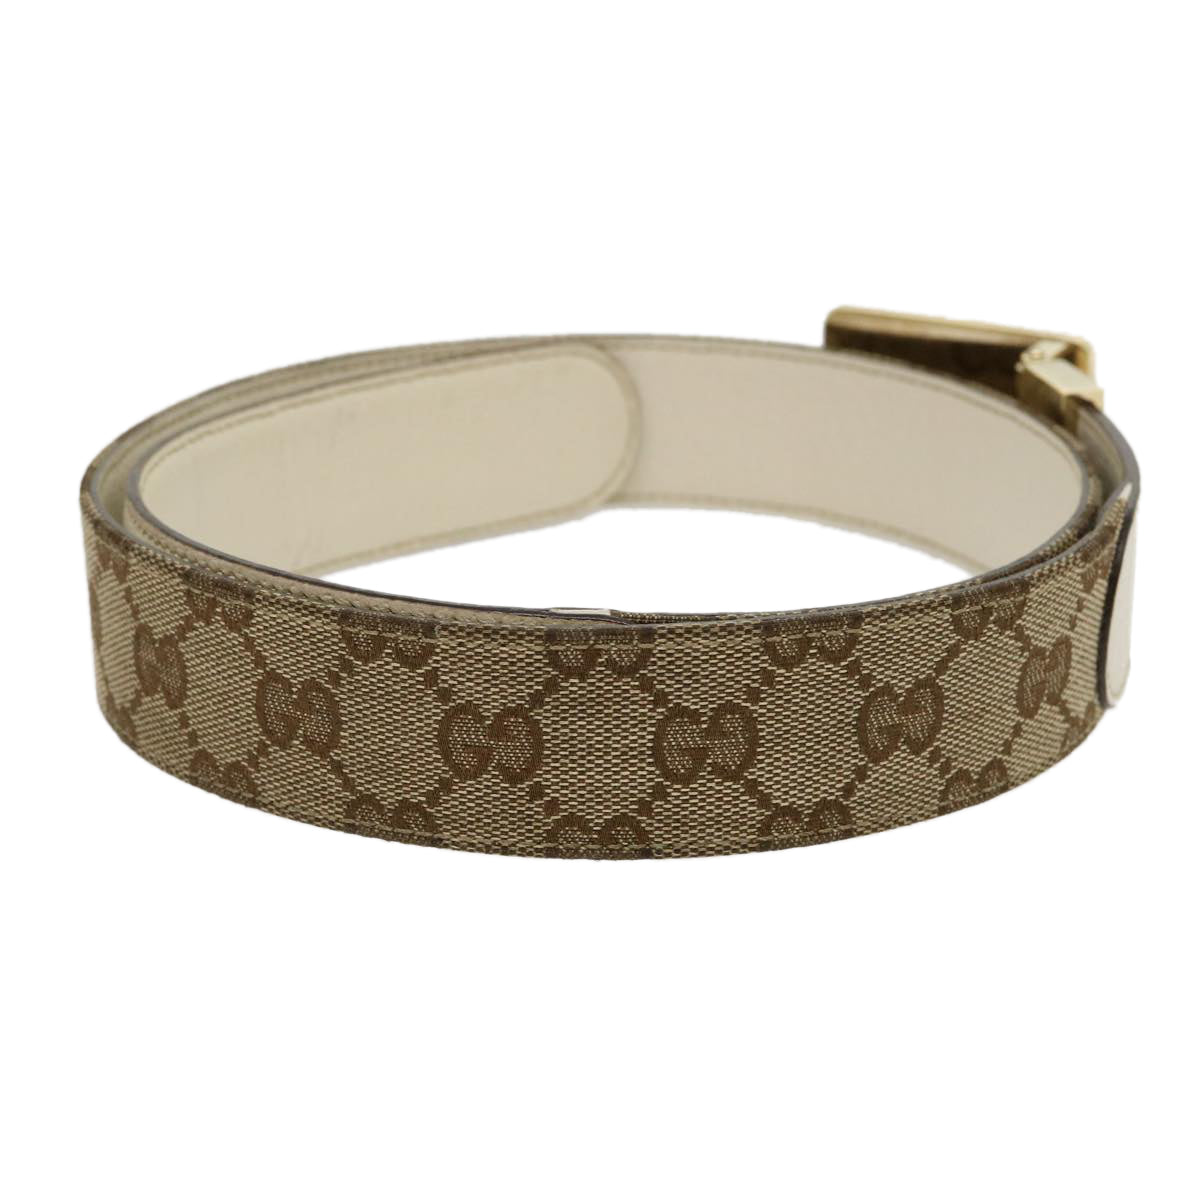 GUCCI GG Canvas Belt Leather Beige White Auth rd2130